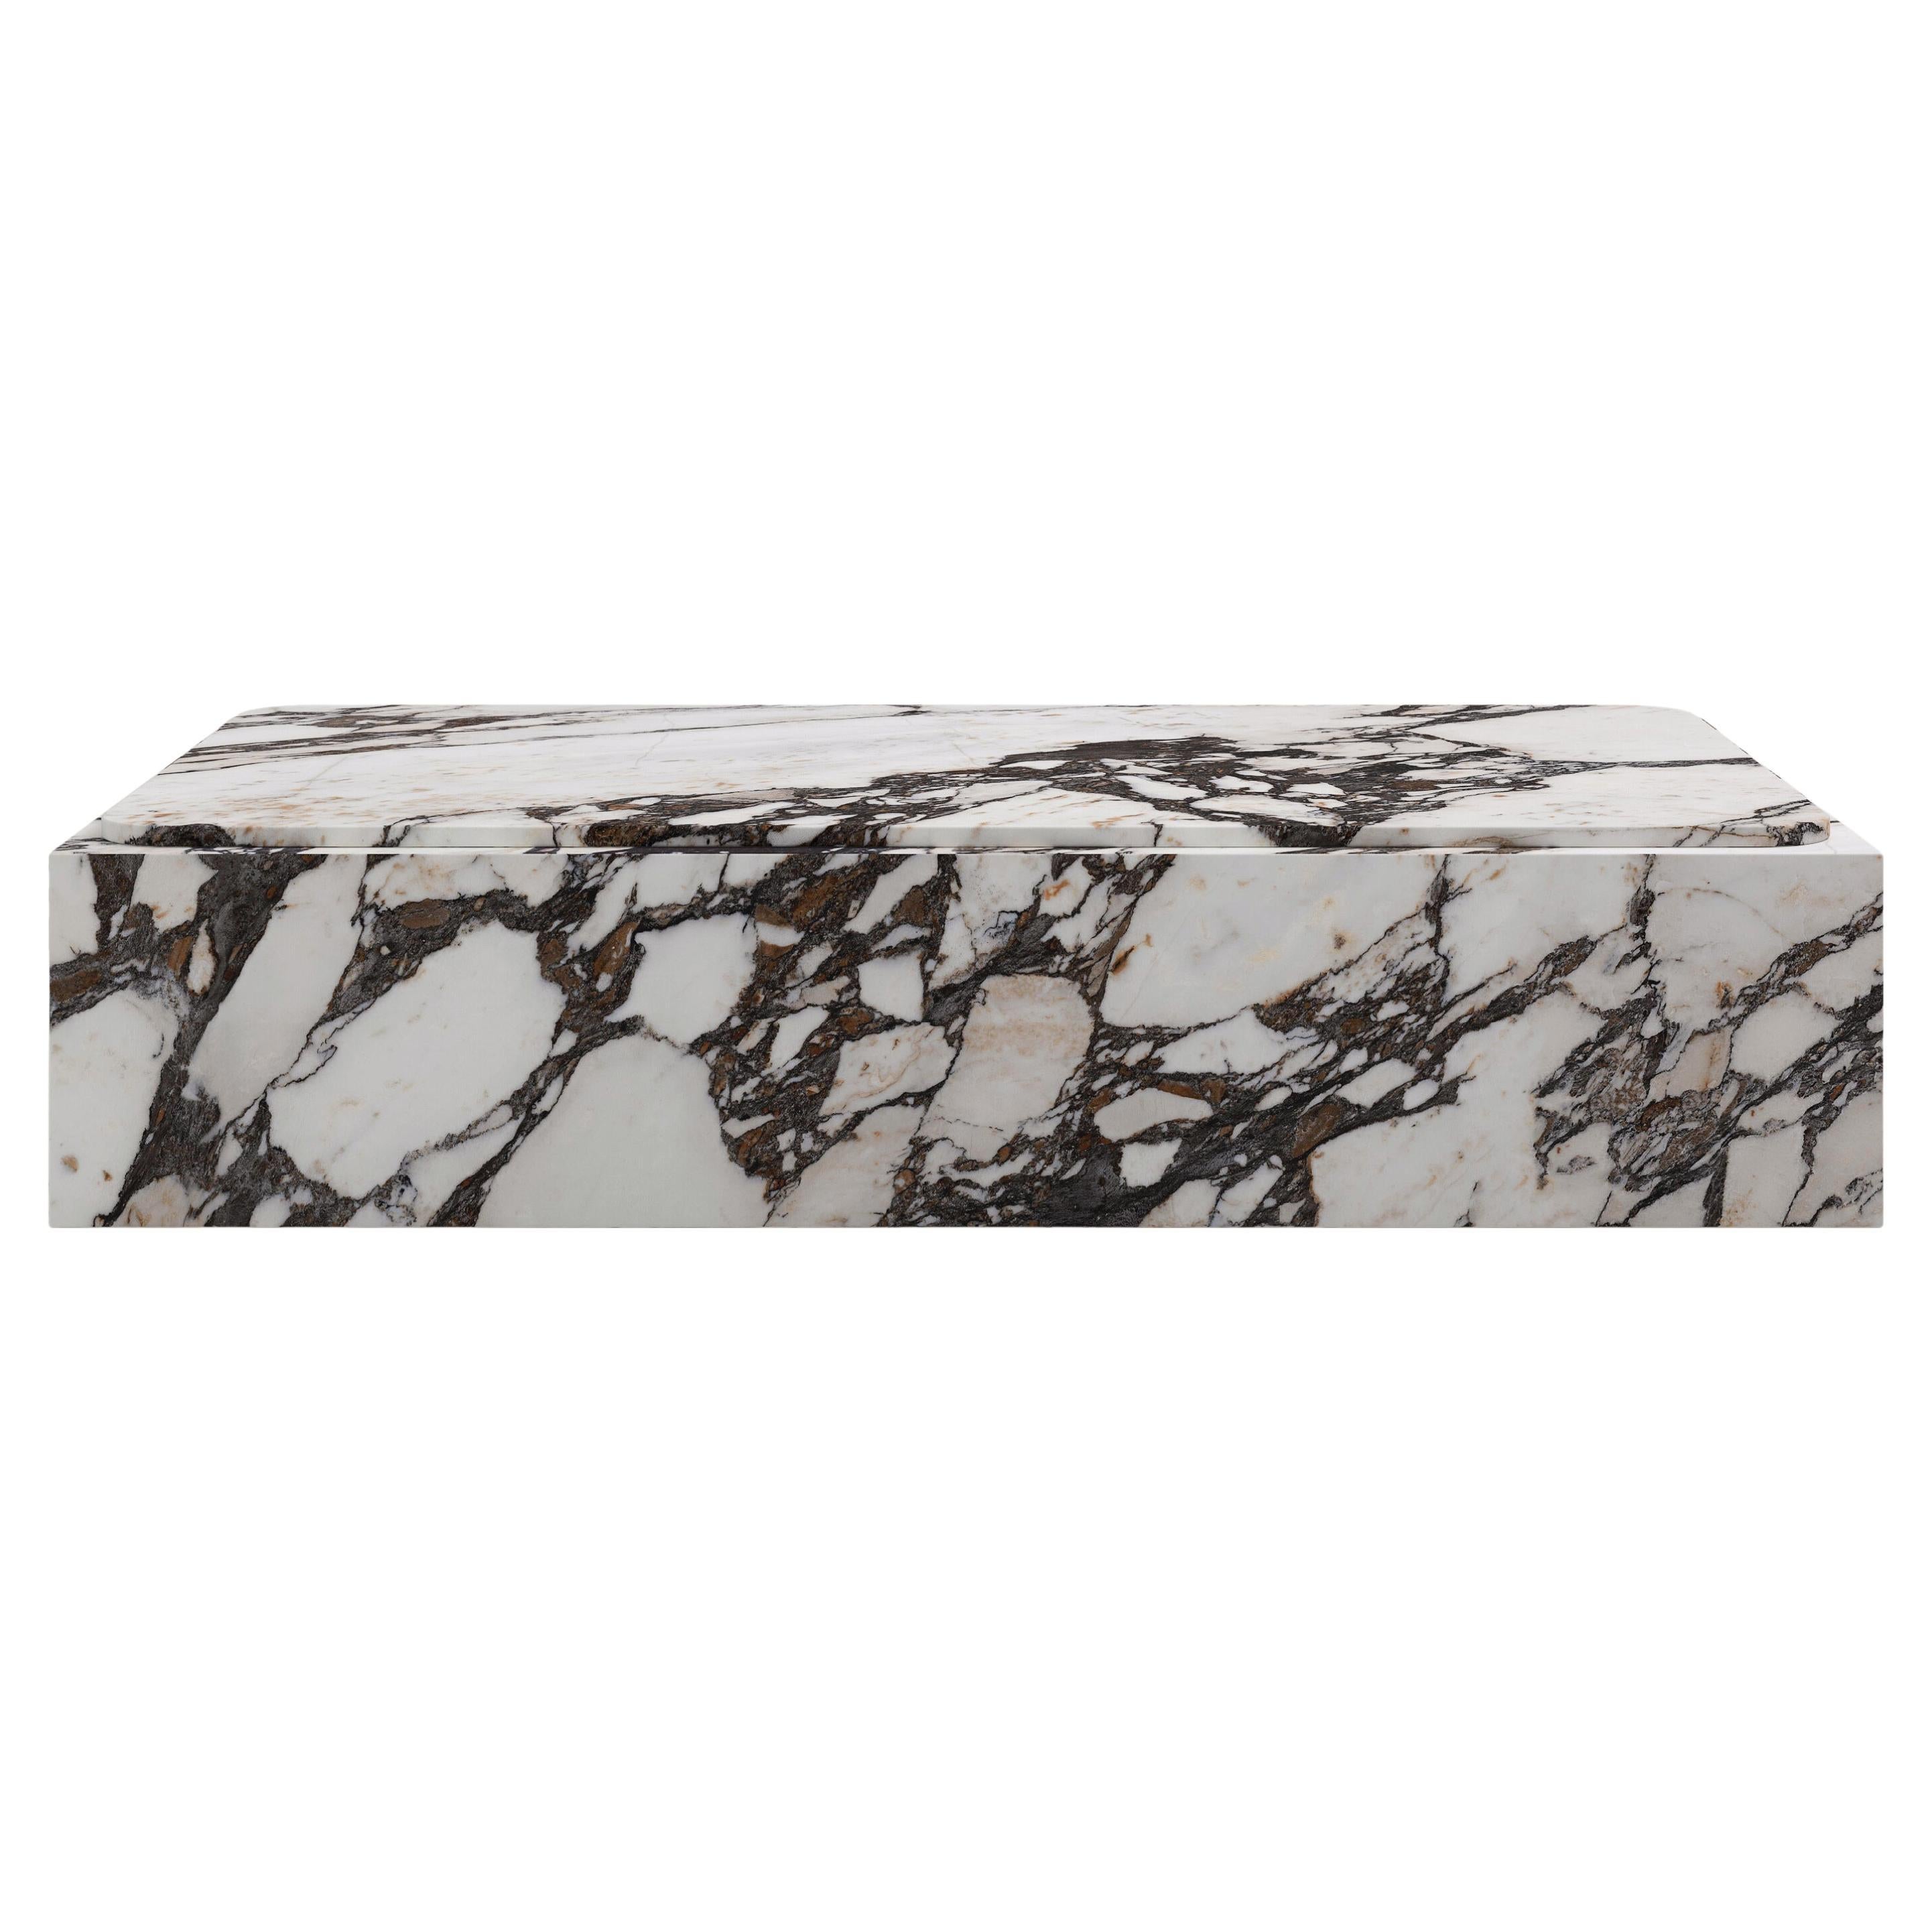 FORM(LA) Cubo Rectangle Plinth Coffee Table 72”L x 42”W x 13”H Calacatta Marble For Sale